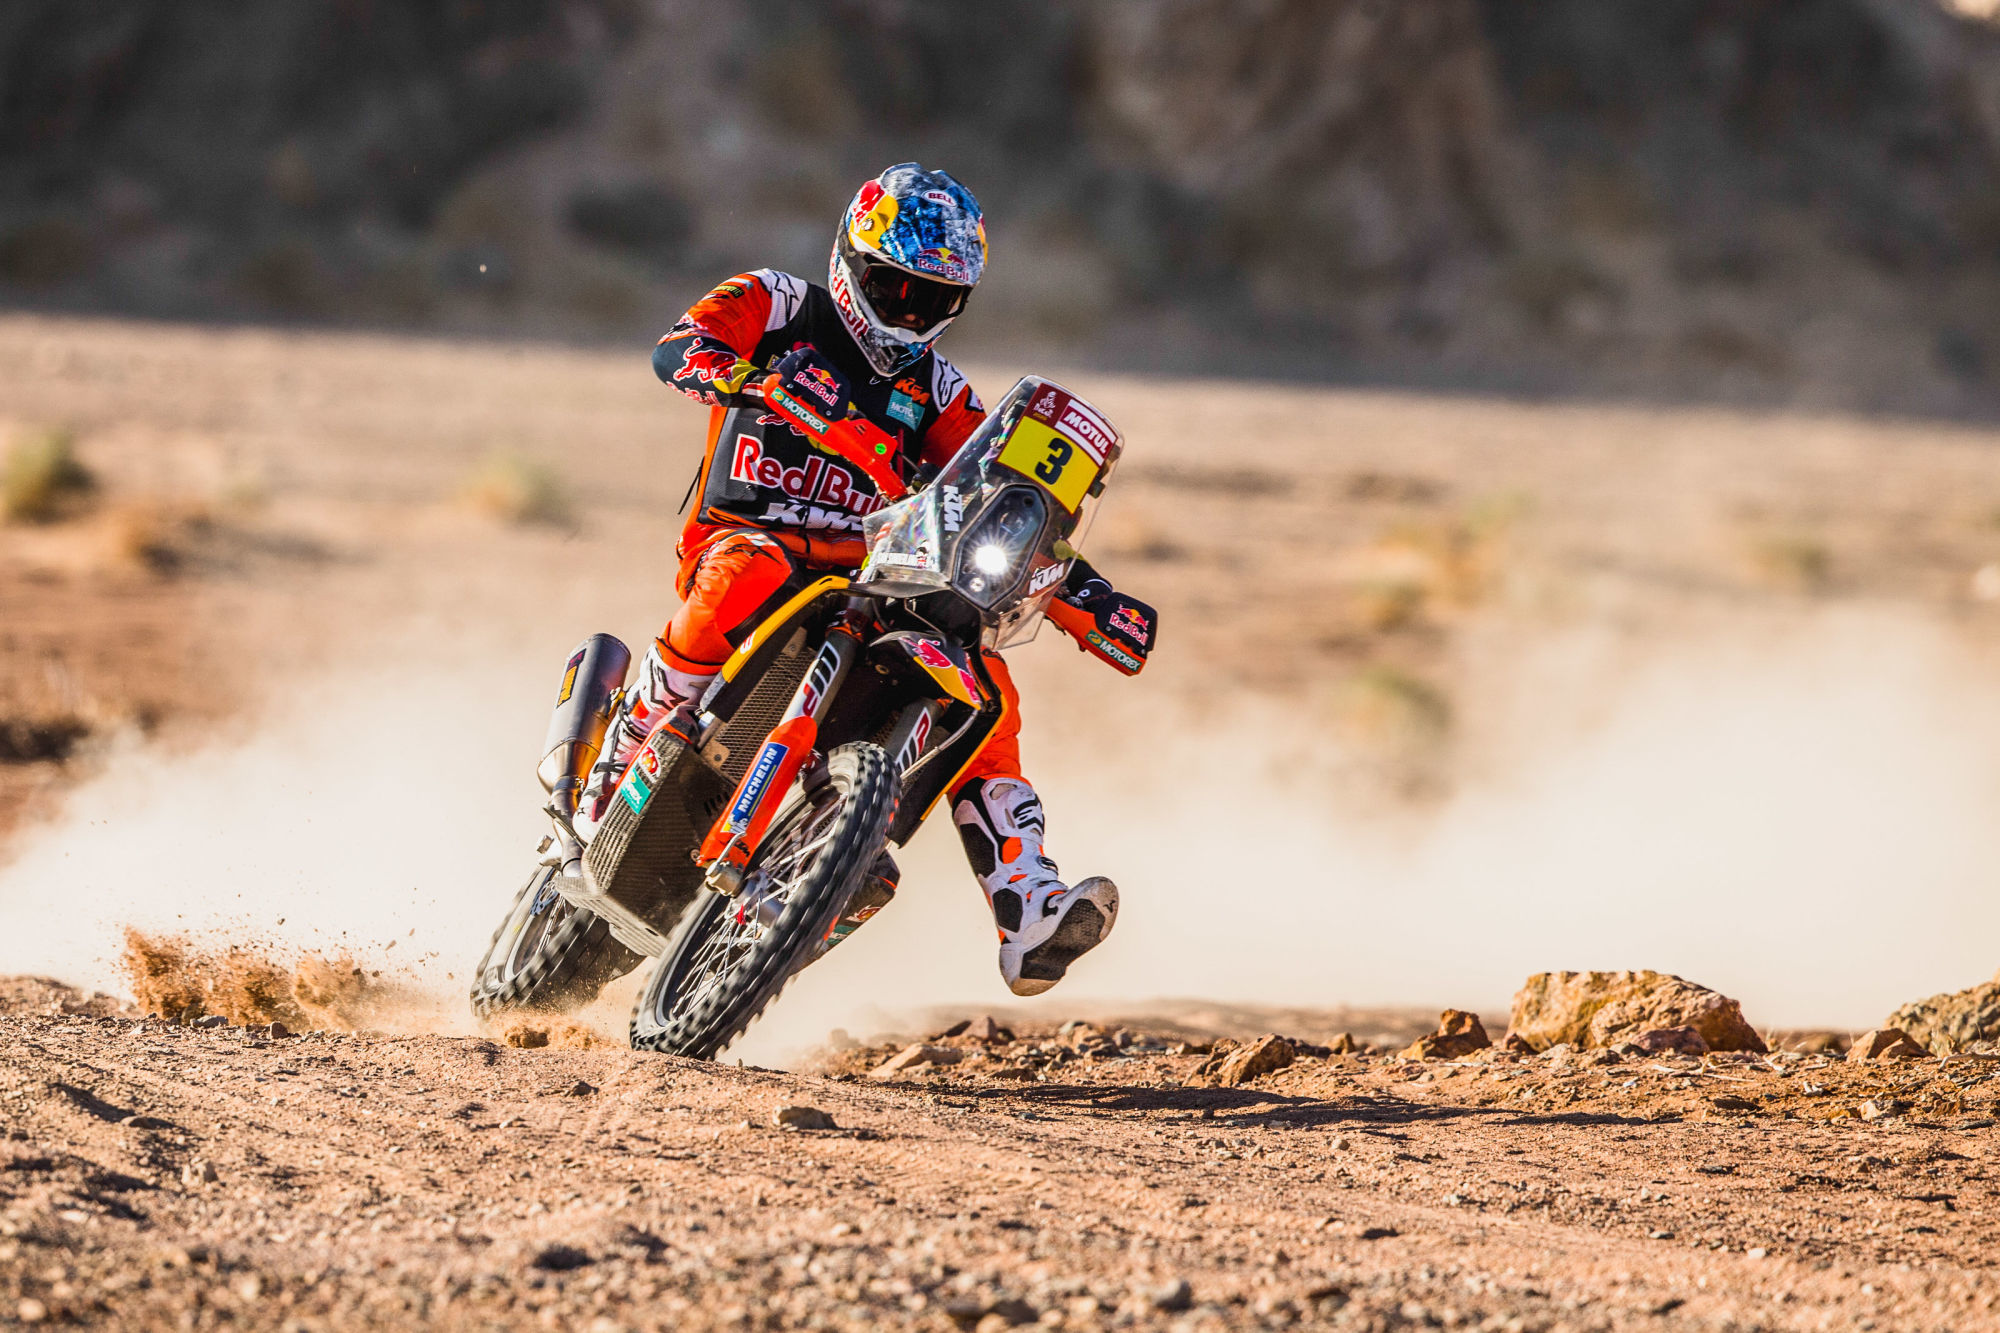 Sam Sunderland (GBR) of Red Bull KTM Factory Team races during stage 2 of Rally Dakar 2020 from Al Wajh to Neom, Saudi Arabia on January 06, 2020. // Flavien Duhamel/Red Bull Content Pool // AP-22QCMJJU92111 // Usage for editorial use only // 

Photo by Icon Sport - Sam SUNDERLAND